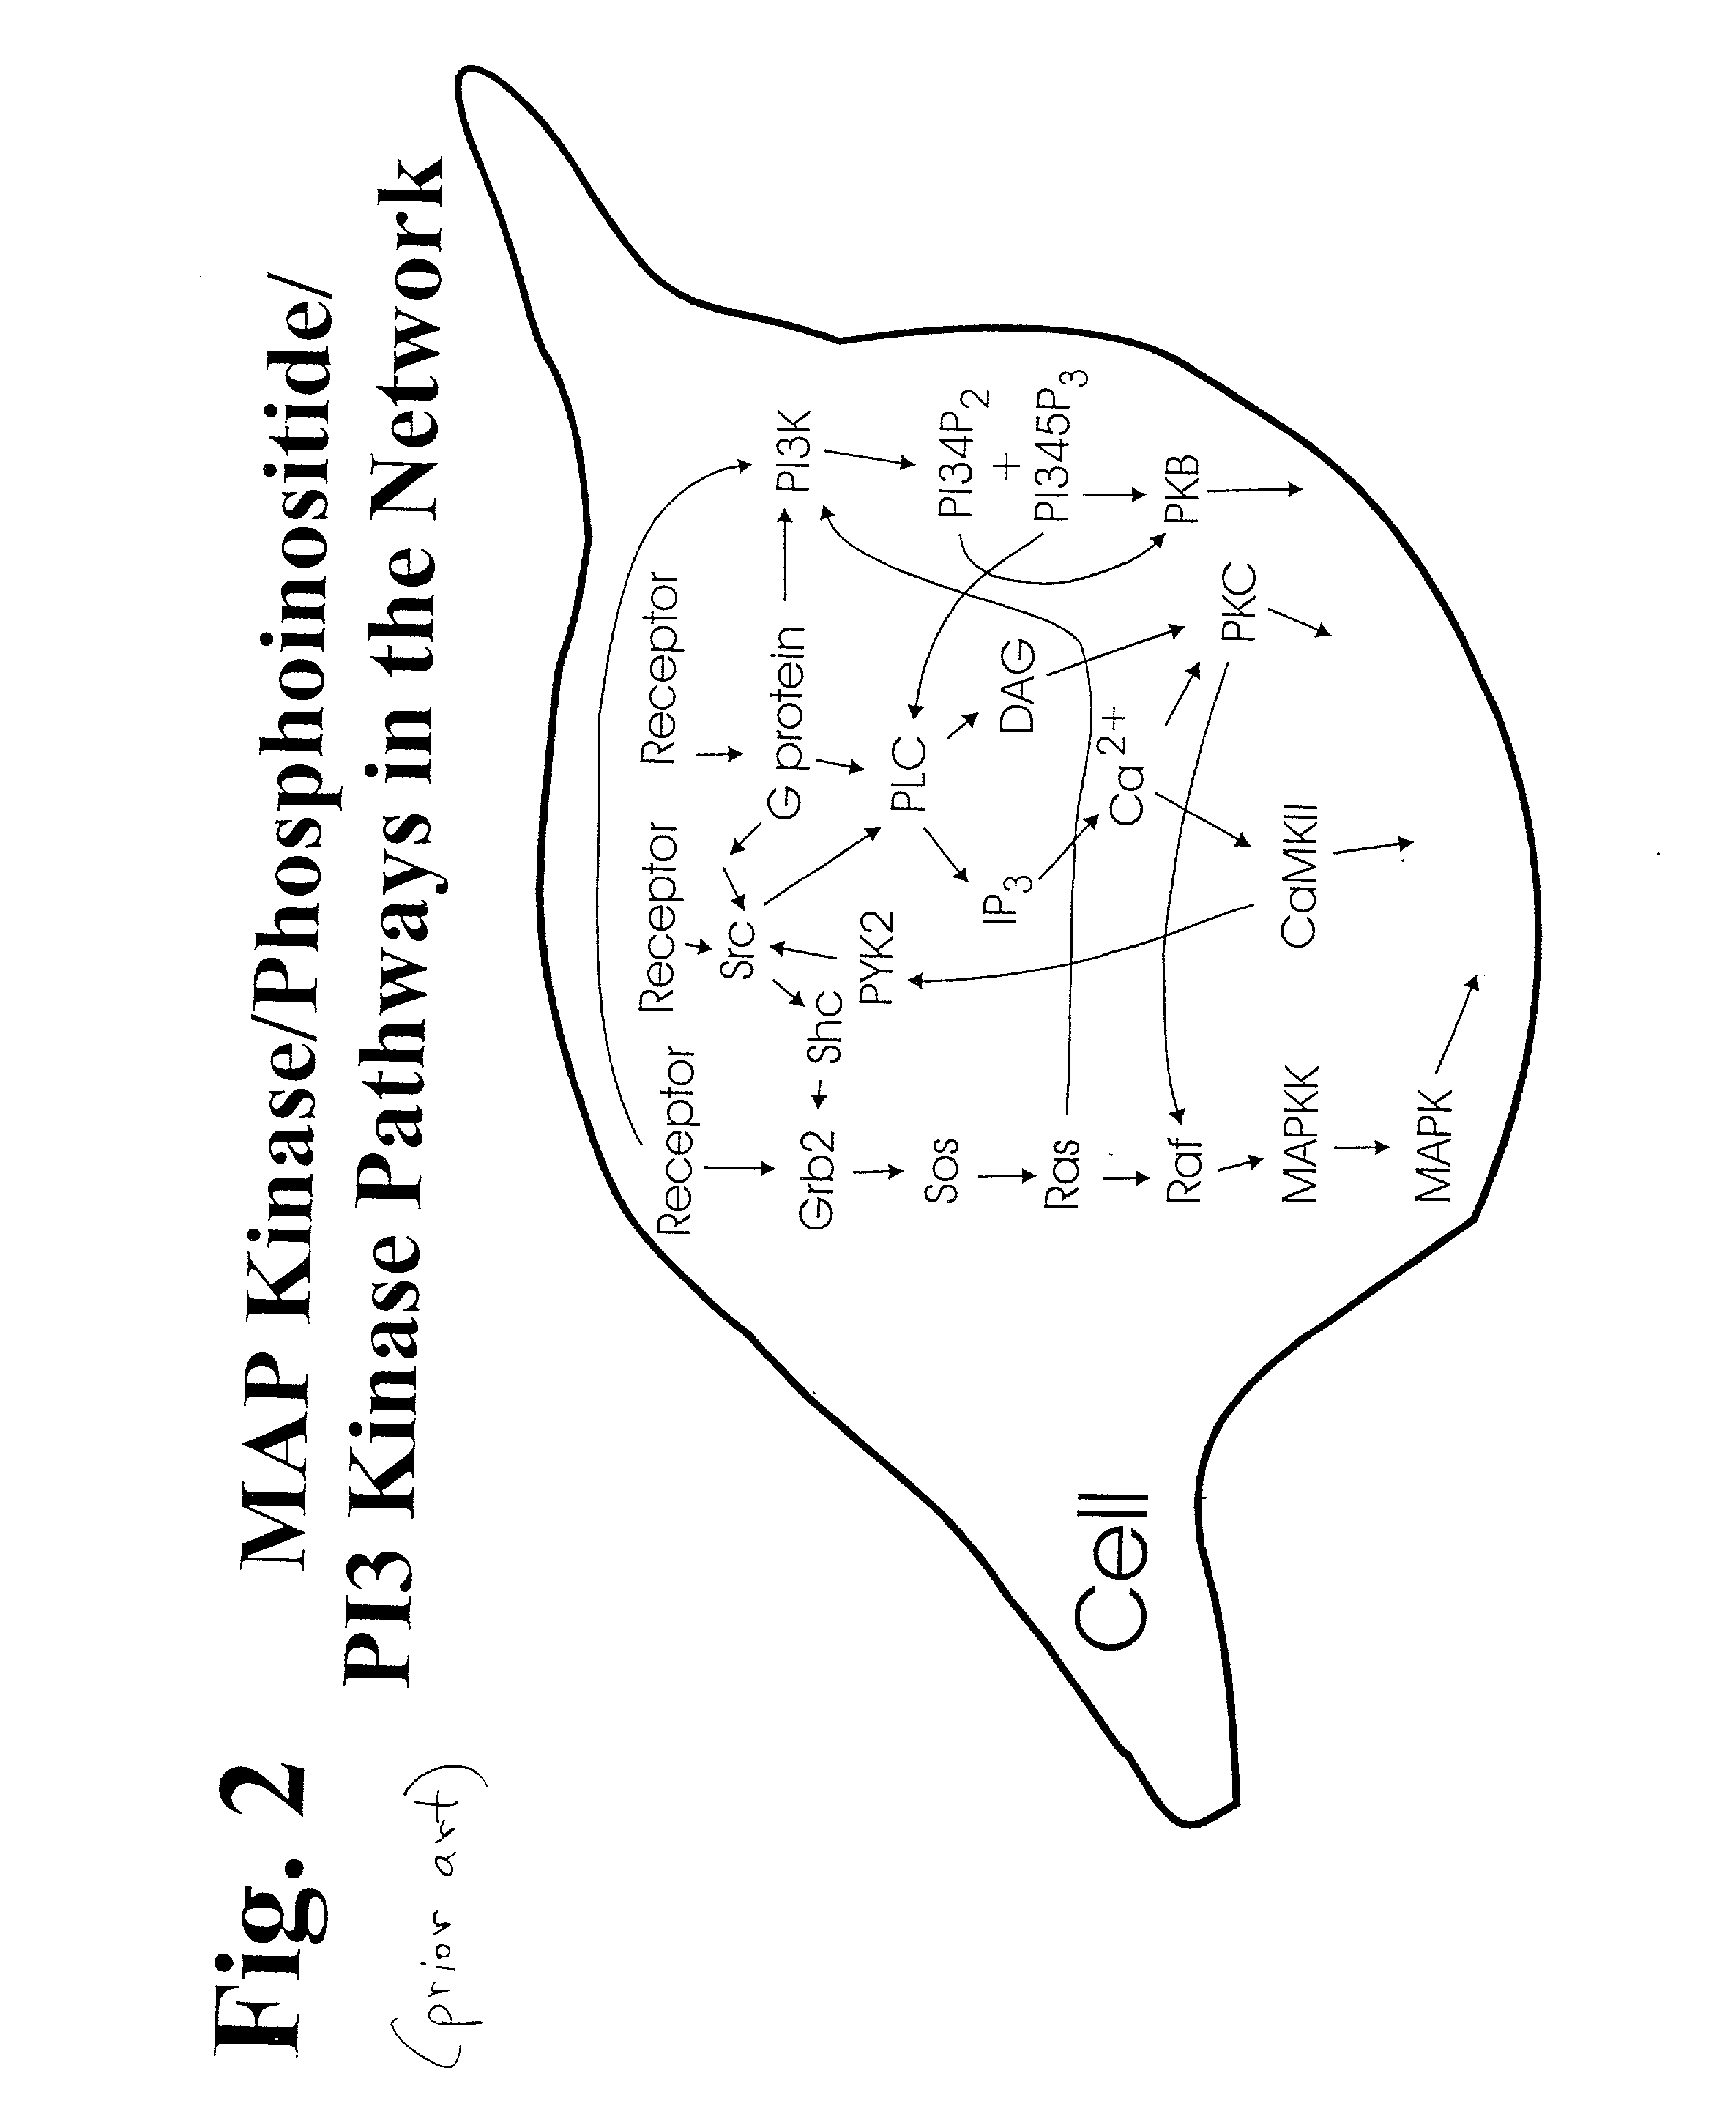 Method to measure the activation state of signaling pathways in cells